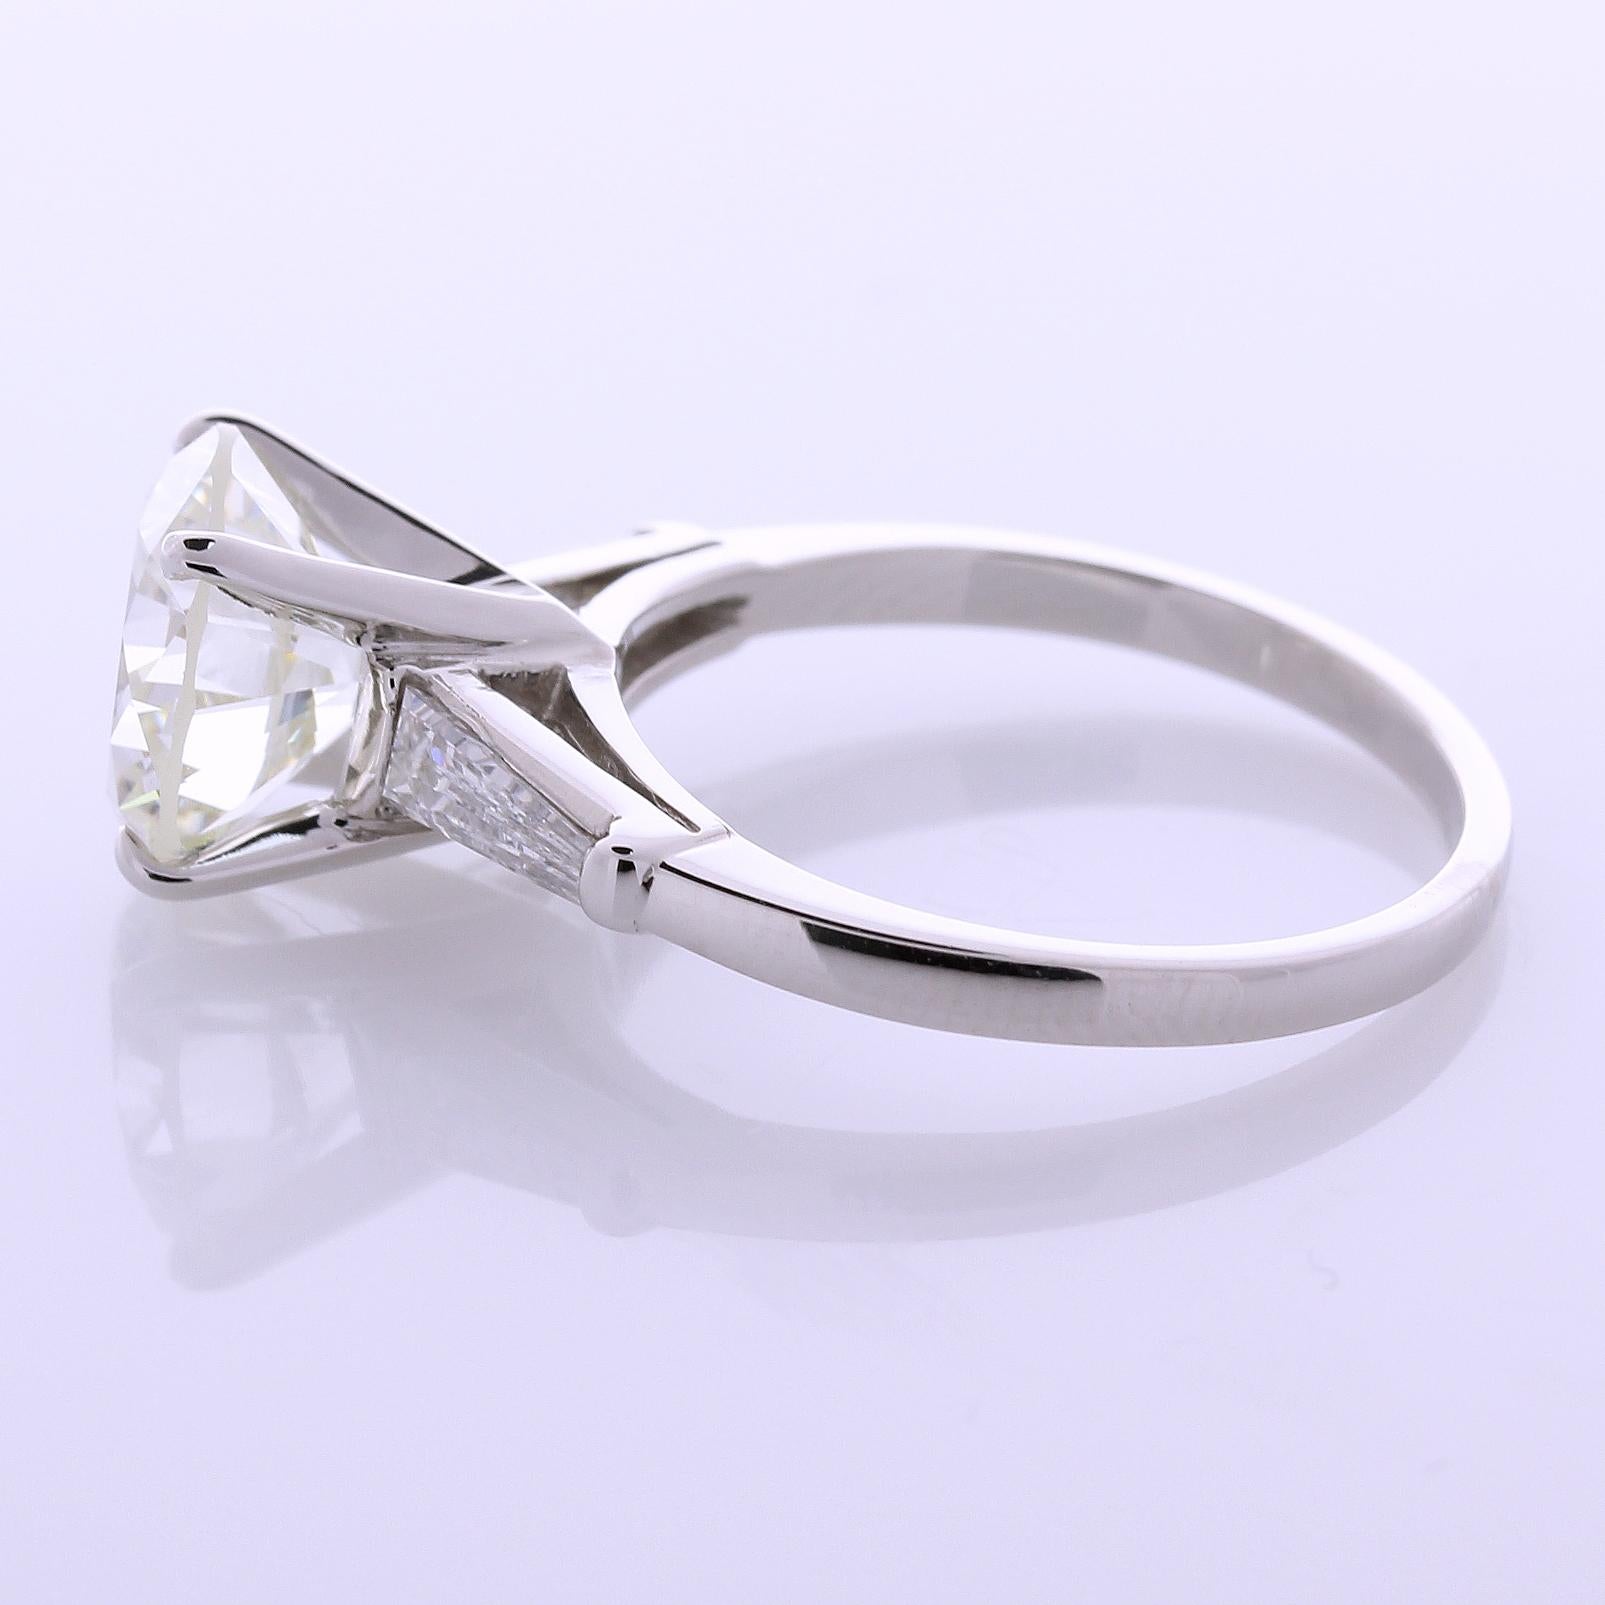 3.00 Carat Round Brilliant Cut H VS1 Clarity Platinum Diamond Ring In Excellent Condition For Sale In New York, NY